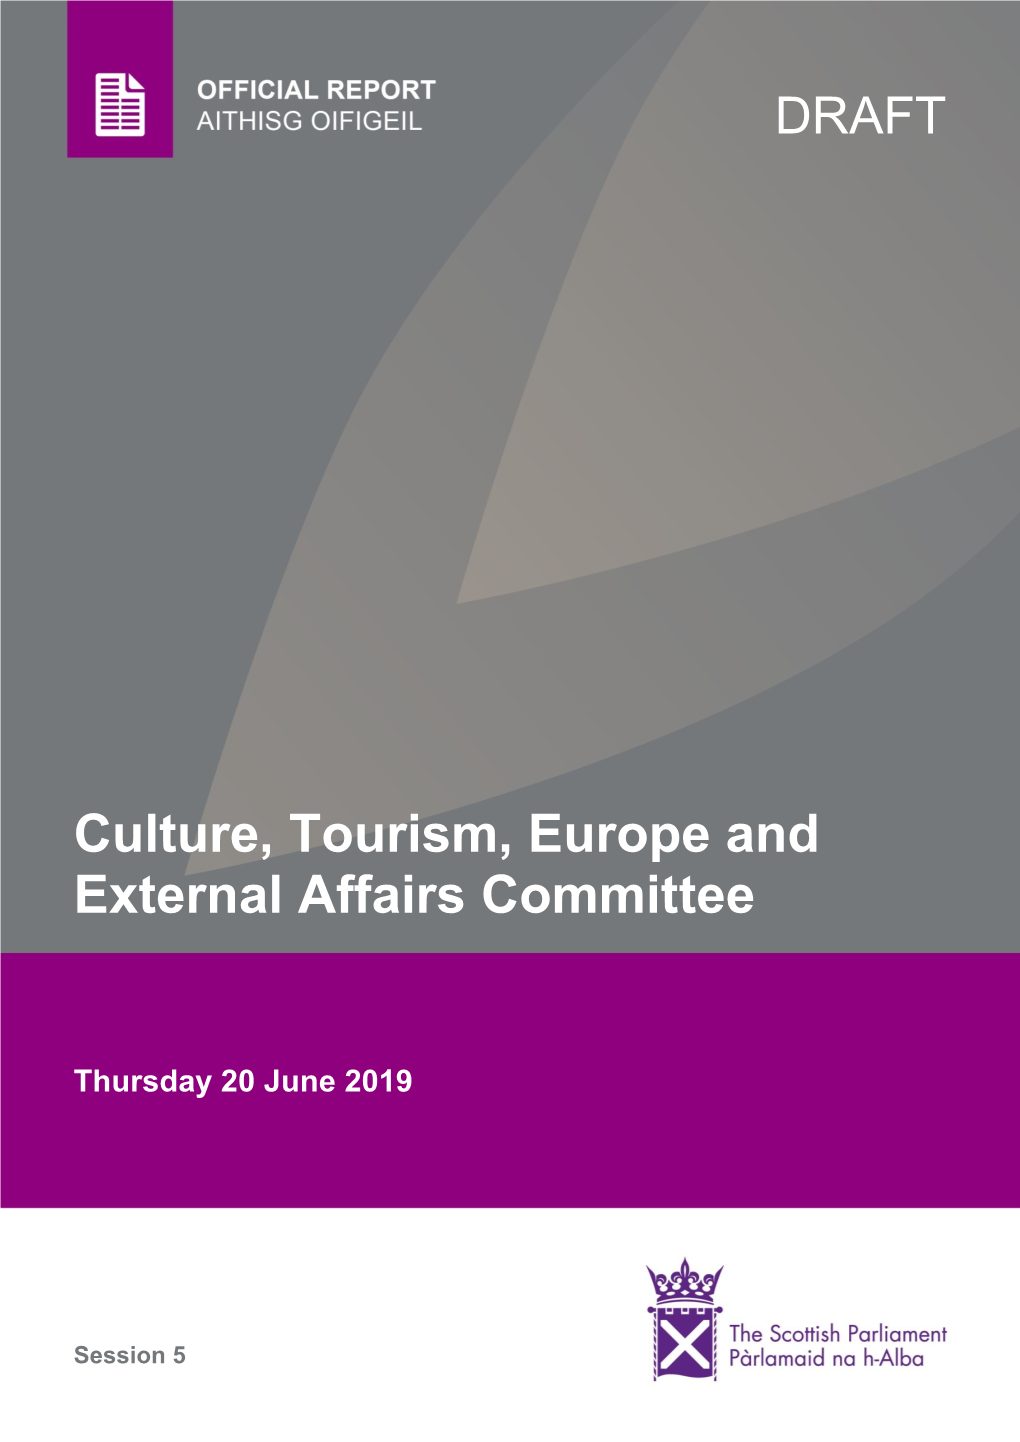 Culture, Tourism, Europe and External Affairs Committee